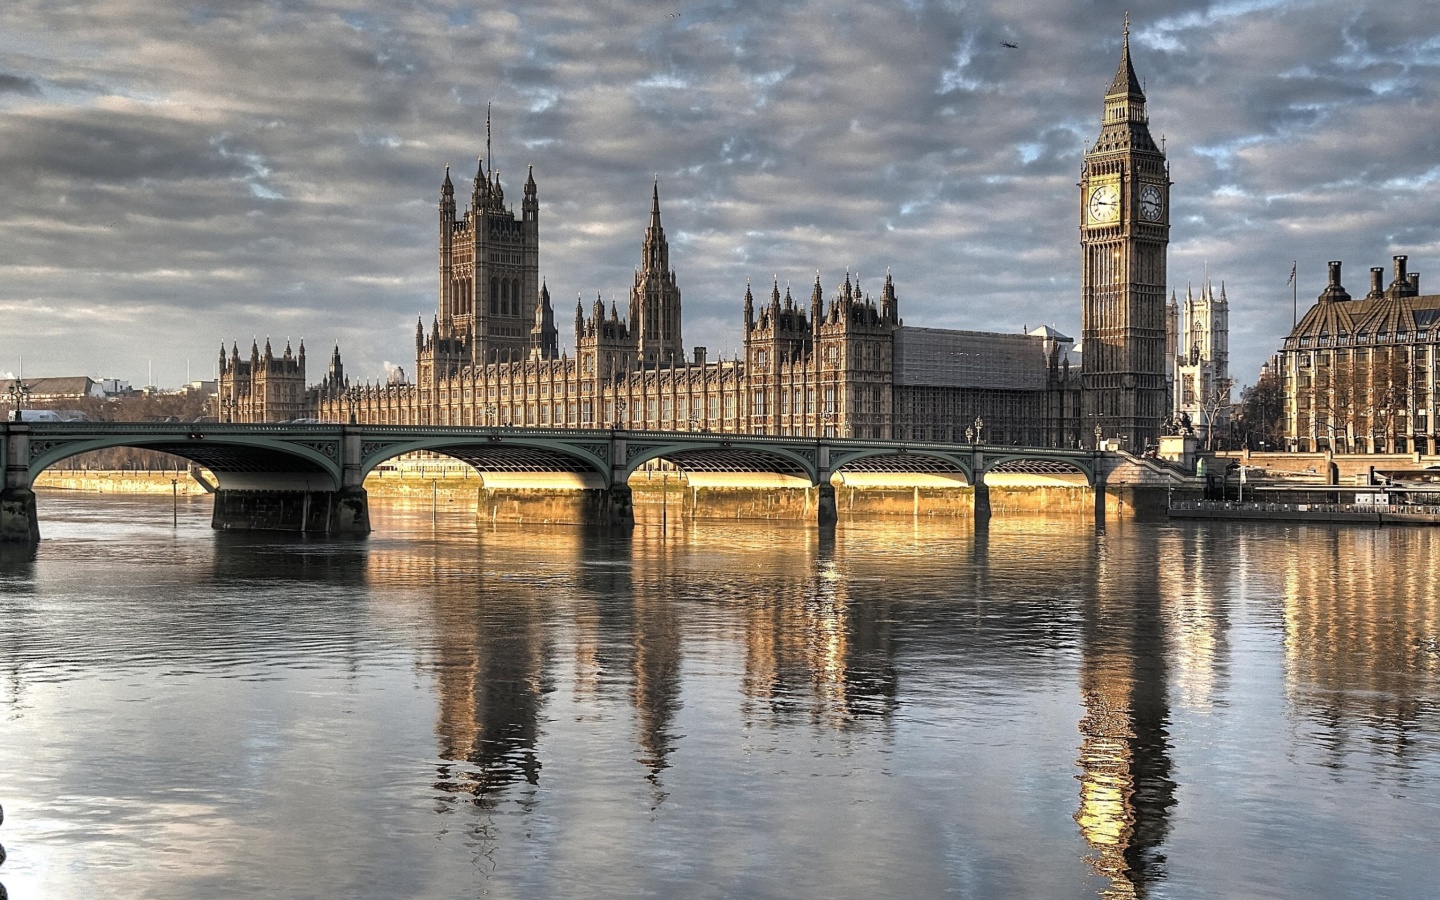 Palace of Westminster in London screenshot #1 1440x900